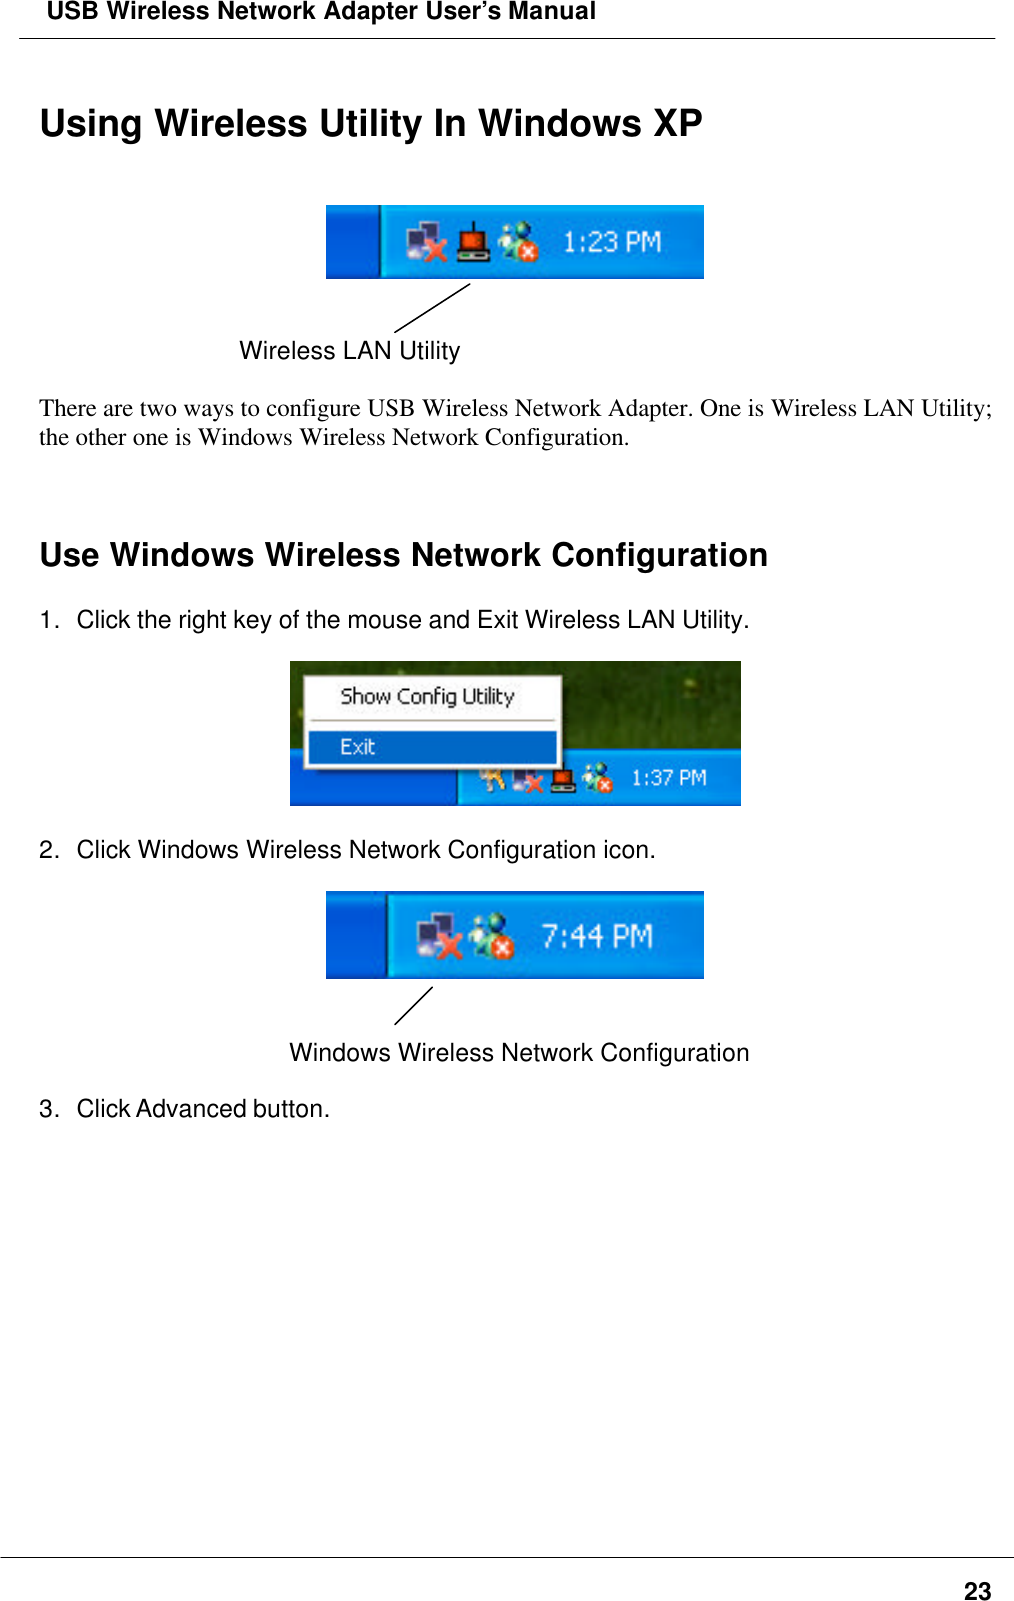  USB Wireless Network Adapter User’s Manual23Using Wireless Utility In Windows XPWireless LAN UtilityThere are two ways to configure USB Wireless Network Adapter. One is Wireless LAN Utility;the other one is Windows Wireless Network Configuration.Use Windows Wireless Network Configuration1. Click the right key of the mouse and Exit Wireless LAN Utility.2. Click Windows Wireless Network Configuration icon.Windows Wireless Network Configuration3. Click Advanced button.